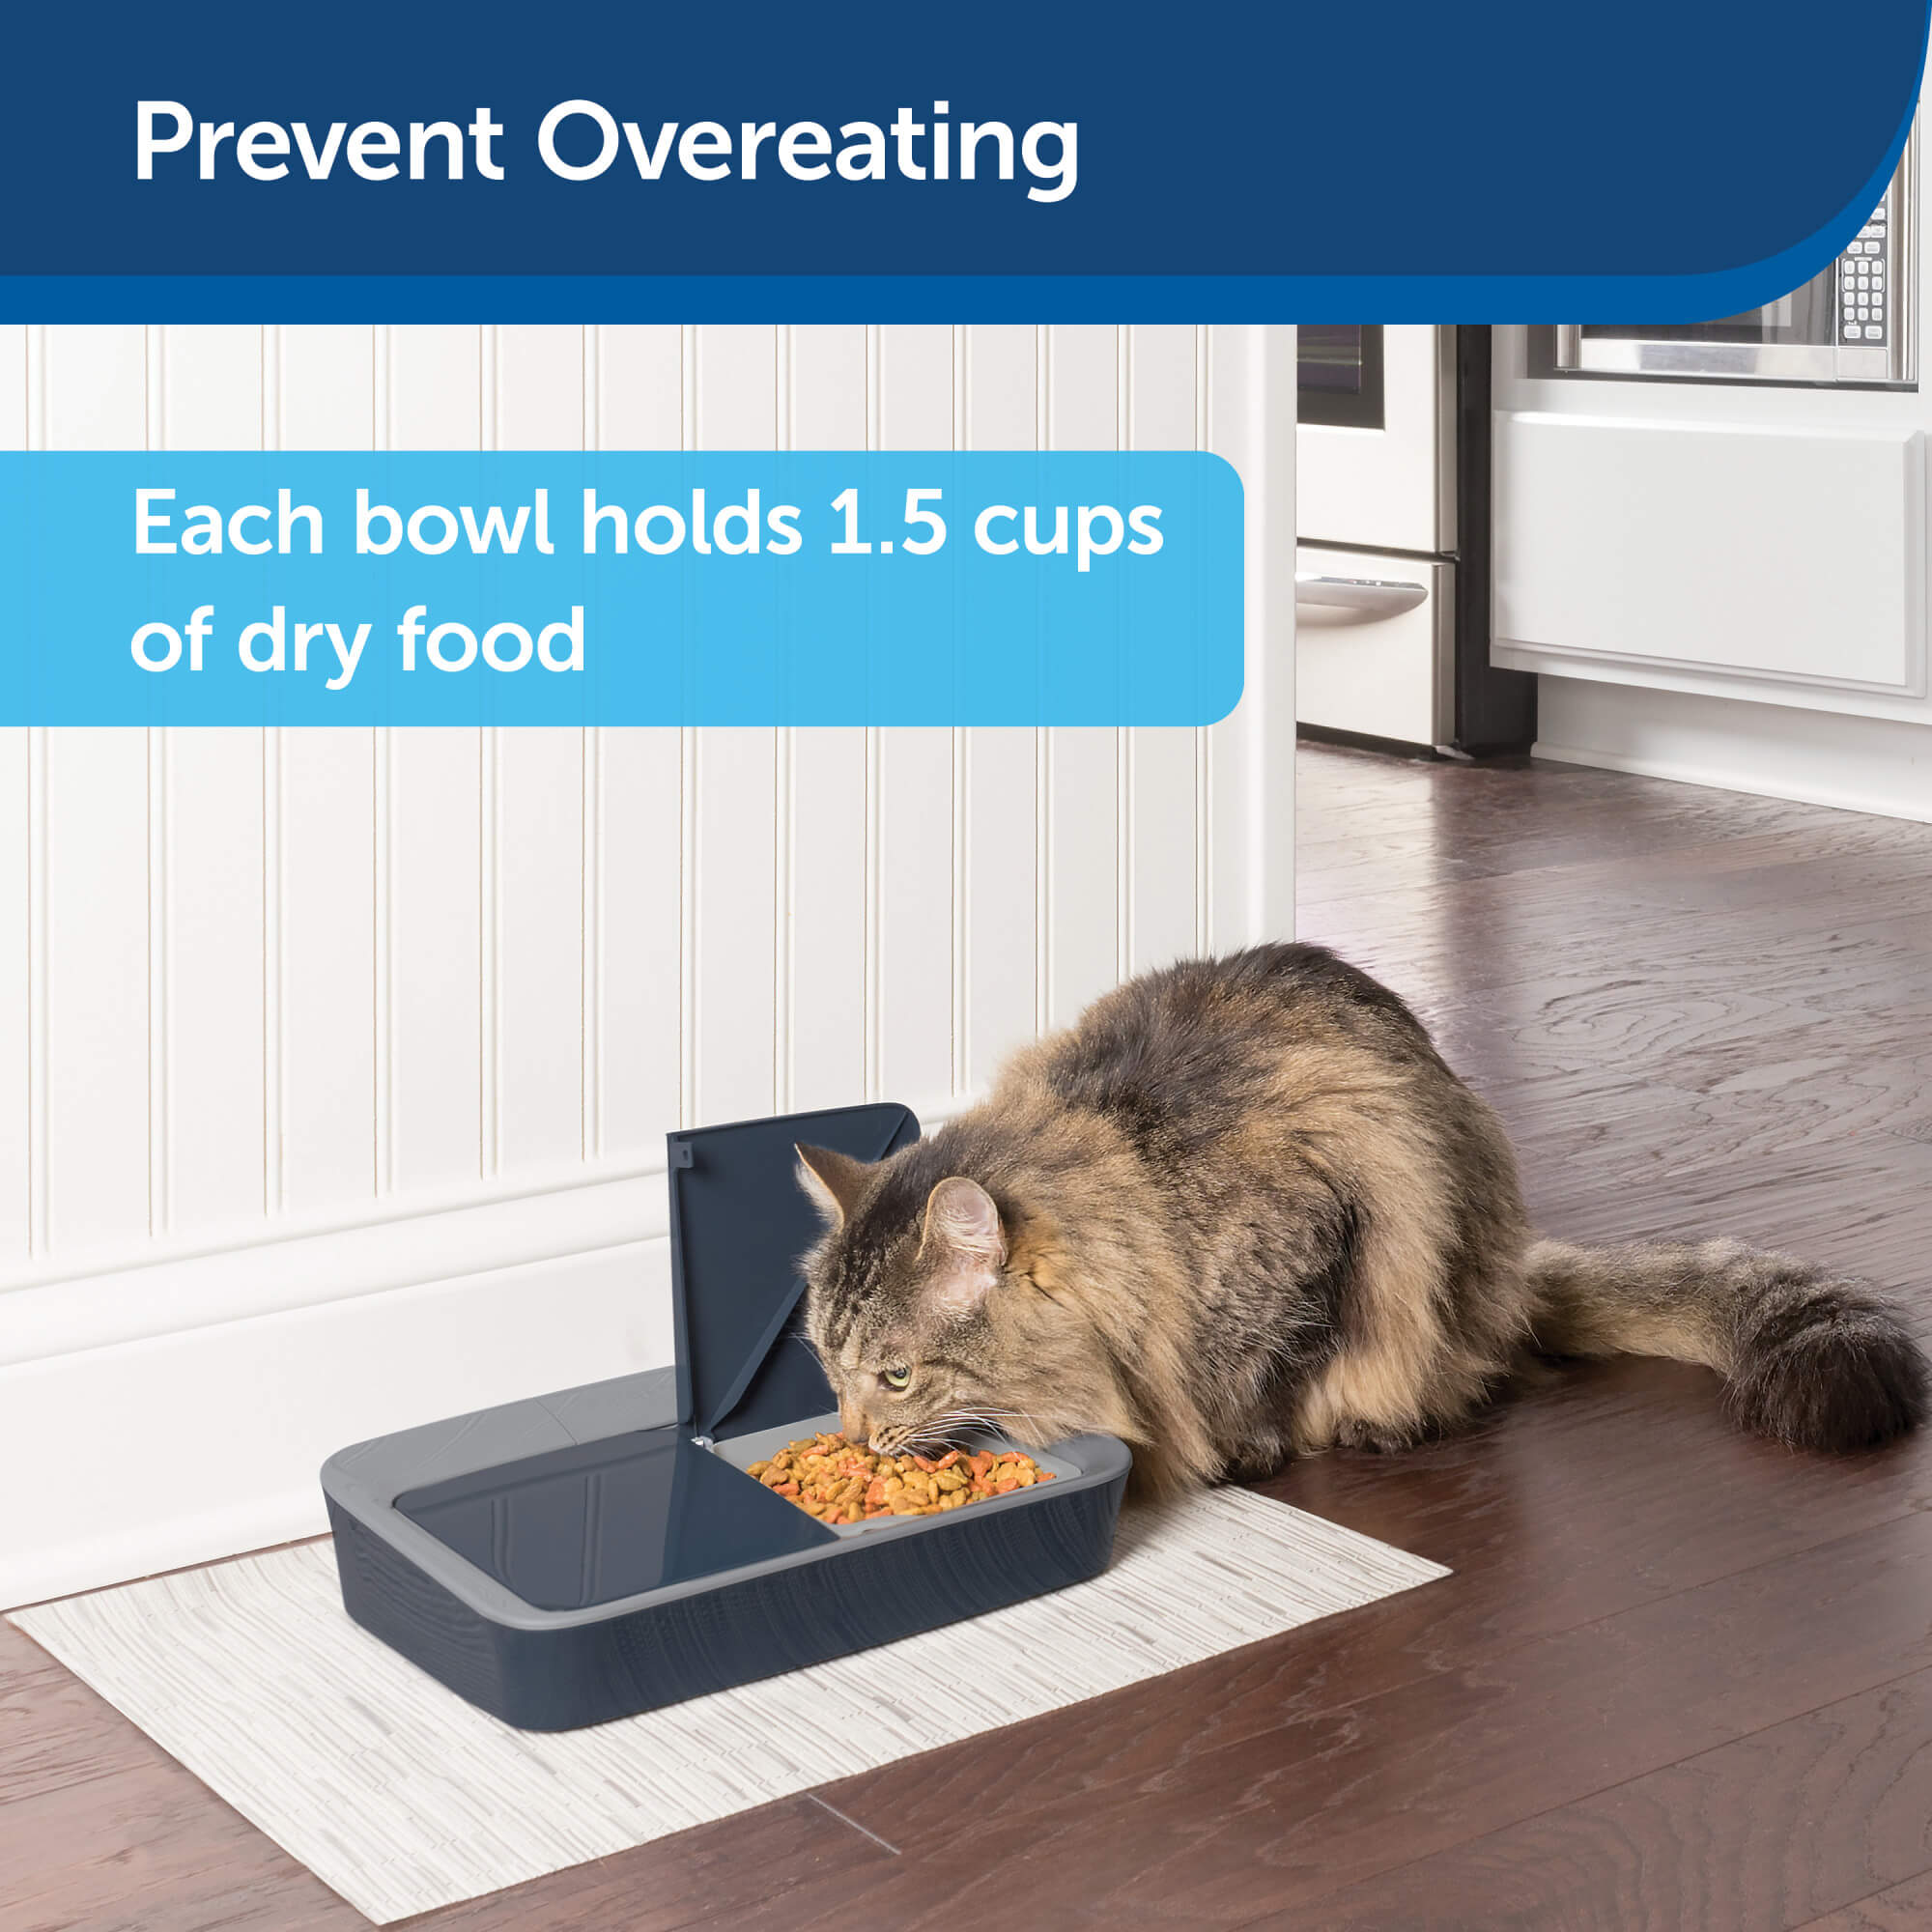 Prevent overeating